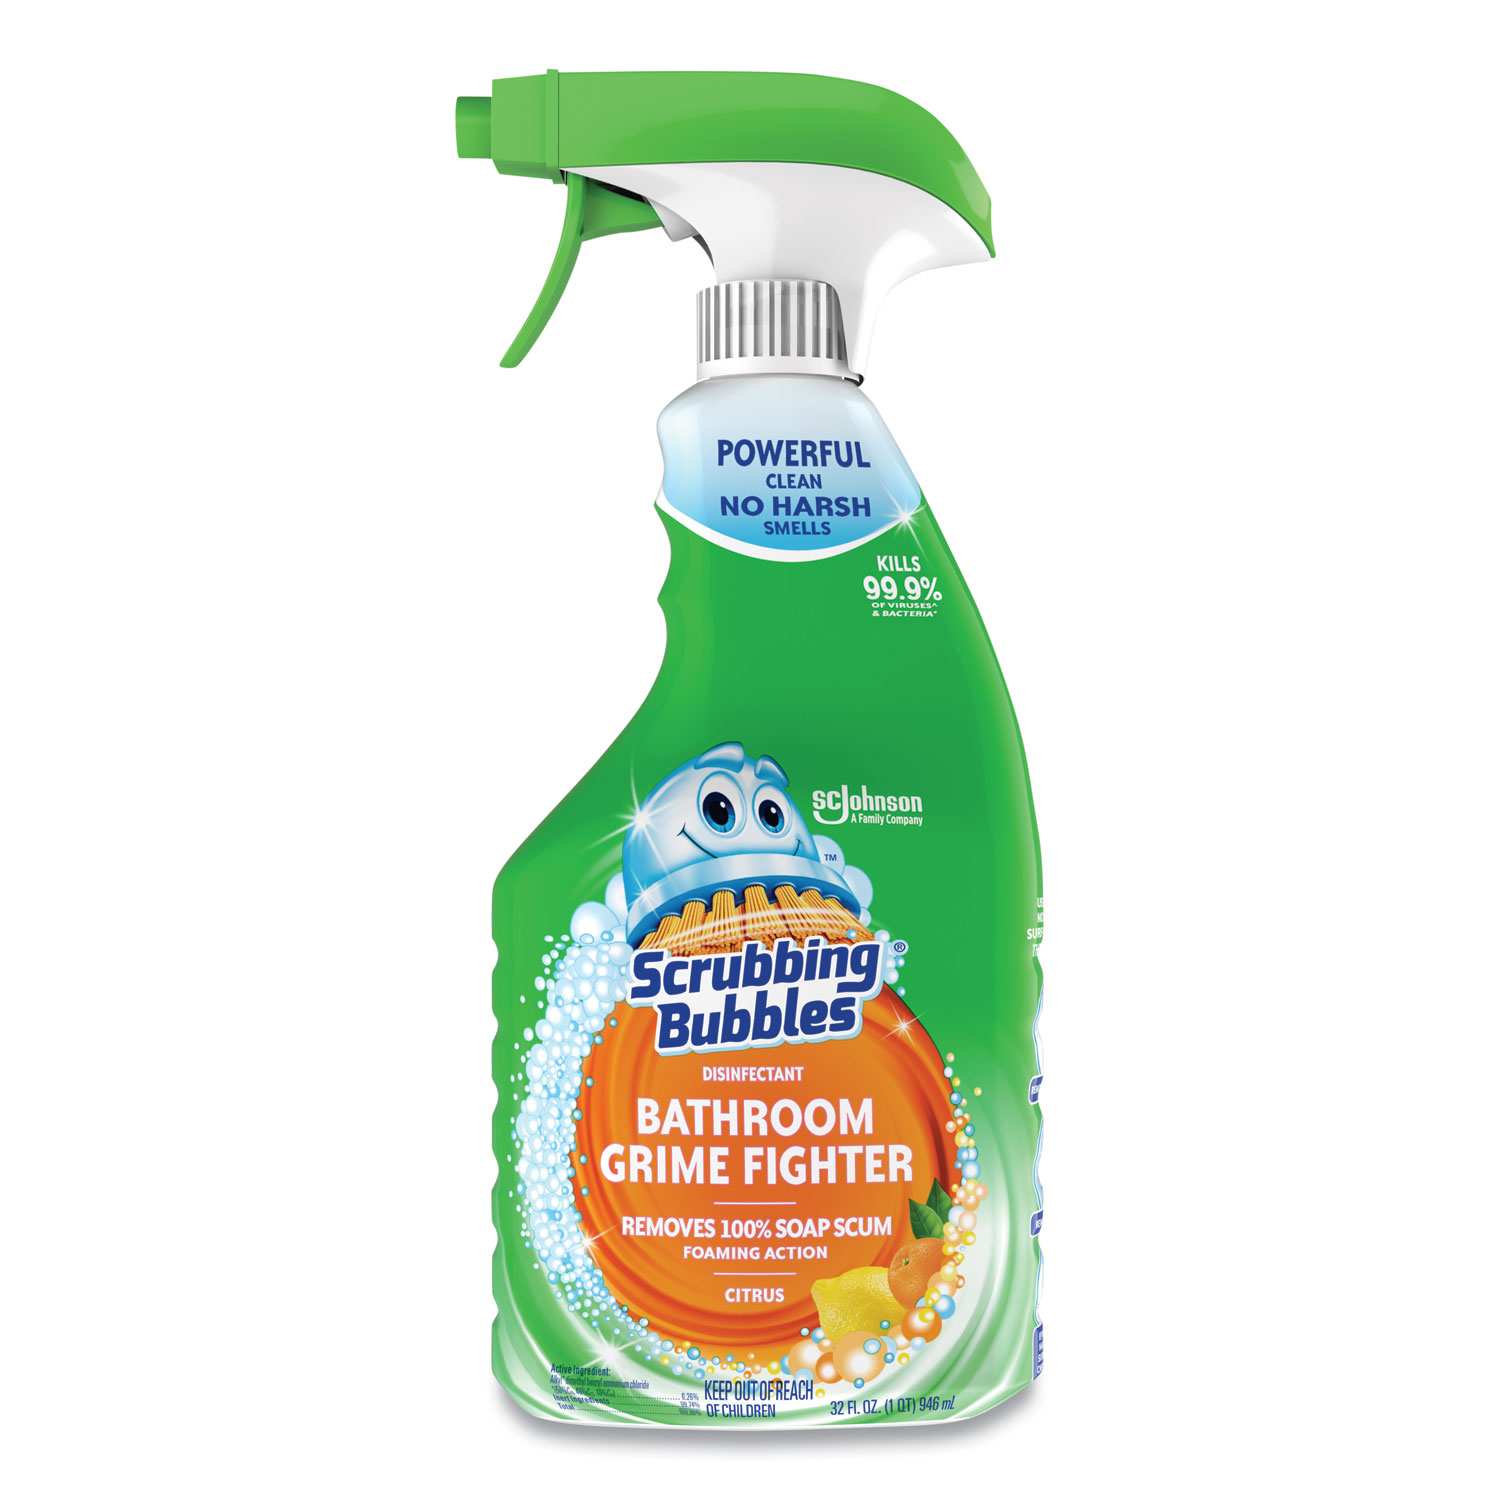 Made in USA - Bathroom, Tile & Toilet Bowl Cleaners; Product Type: Bathroom  Cleaner; Form: Paste; Container Type: Bottle; Scent: Ammonia; Application:  Bathroom Surfaces - 16802522 - MSC Industrial Supply